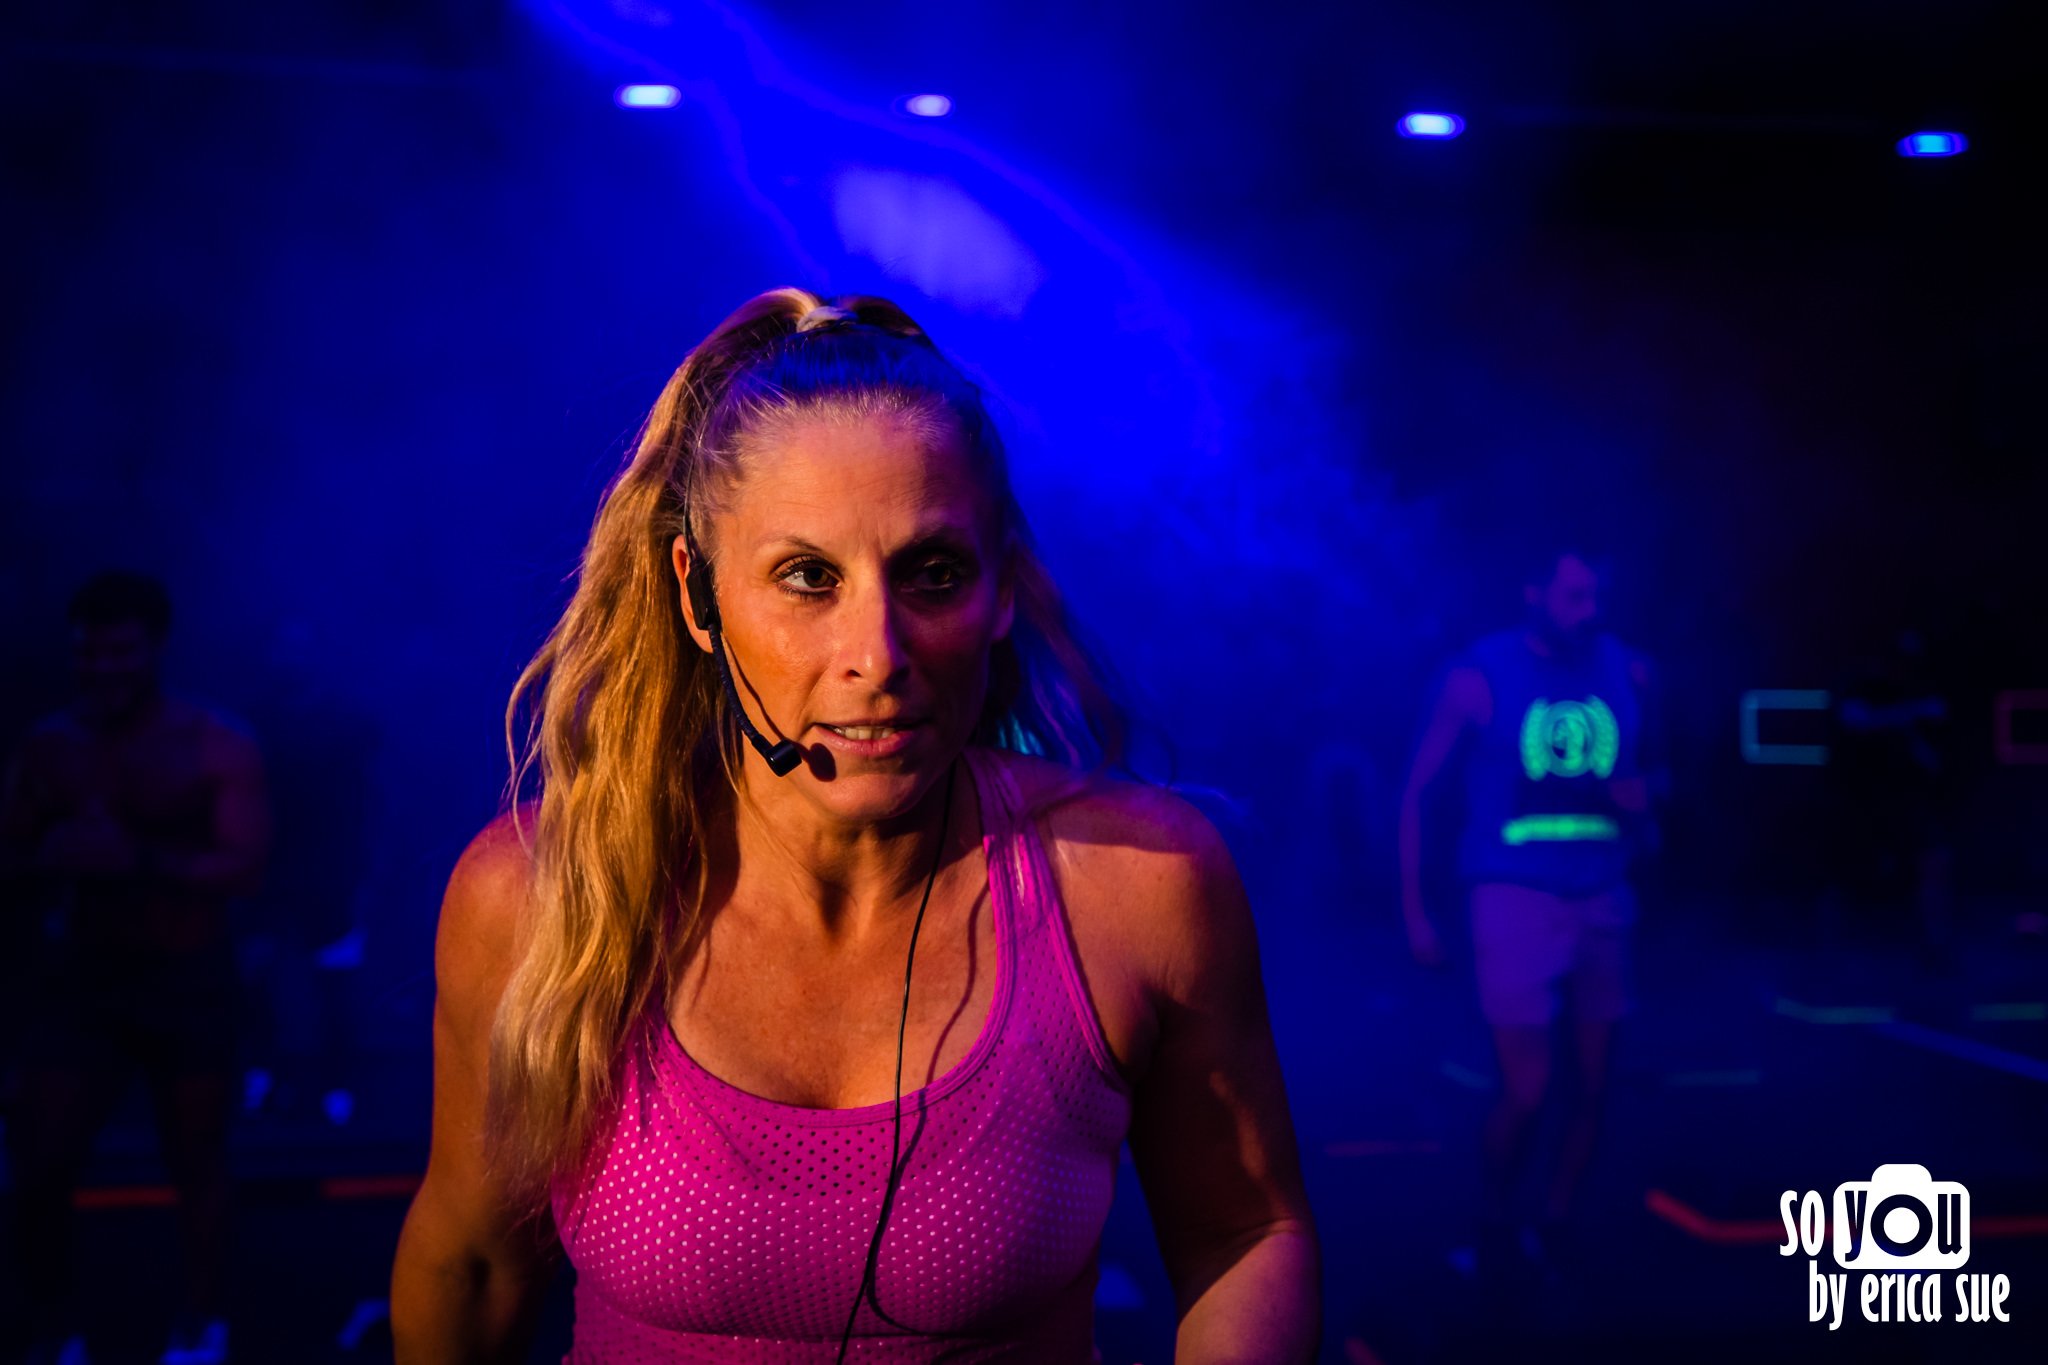 24-challenge-fitness-ft-lauderdale-glow-workout-fri-night-lights-so-you-by-erica-sue-davie-photographer-ES3_6871.jpg